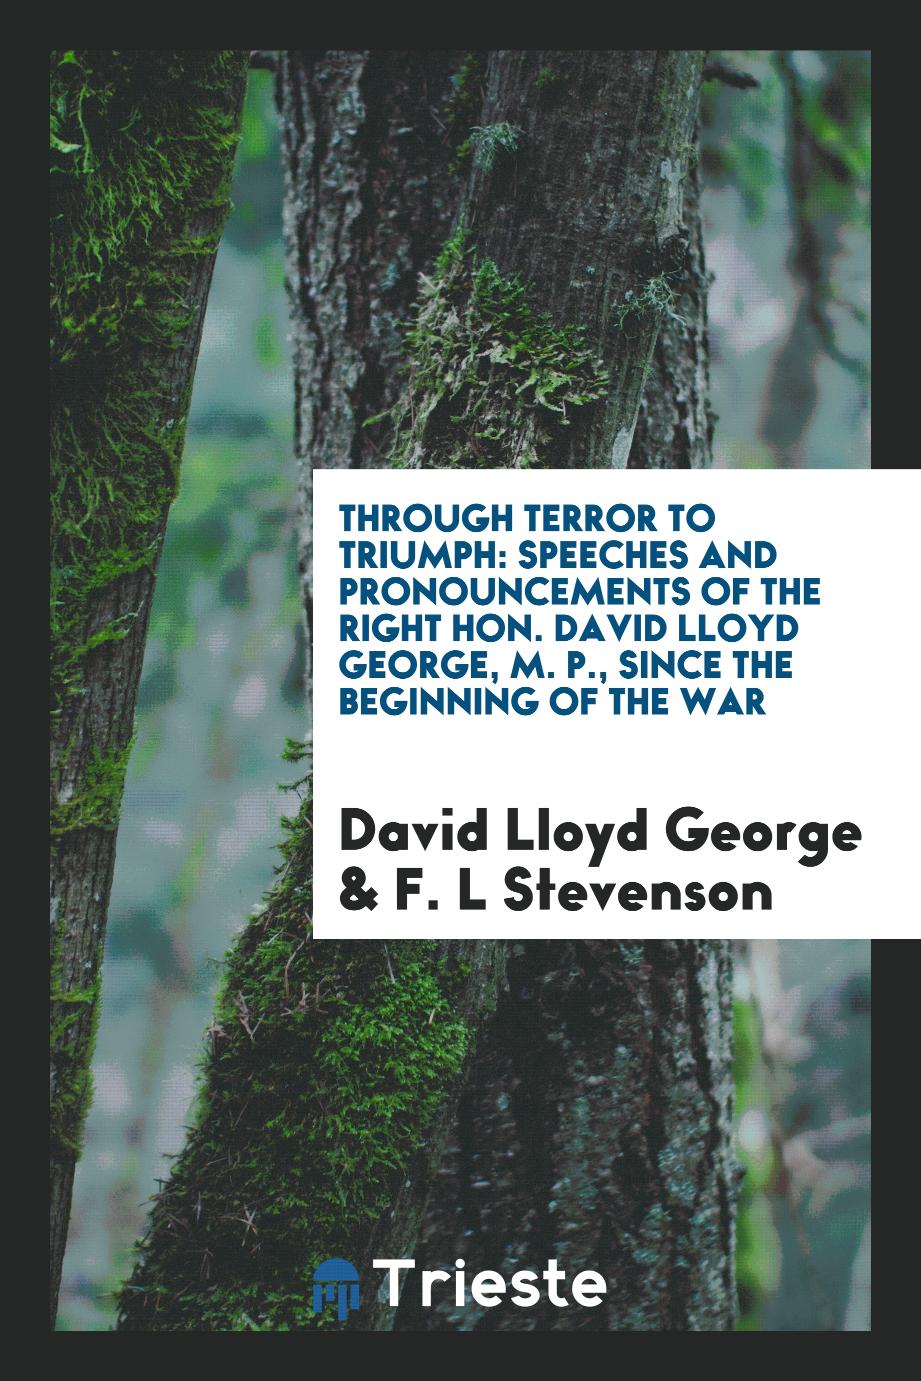 Through terror to triumph: speeches and pronouncements of the Right Hon. David Lloyd George, M. P., since the beginning of the war